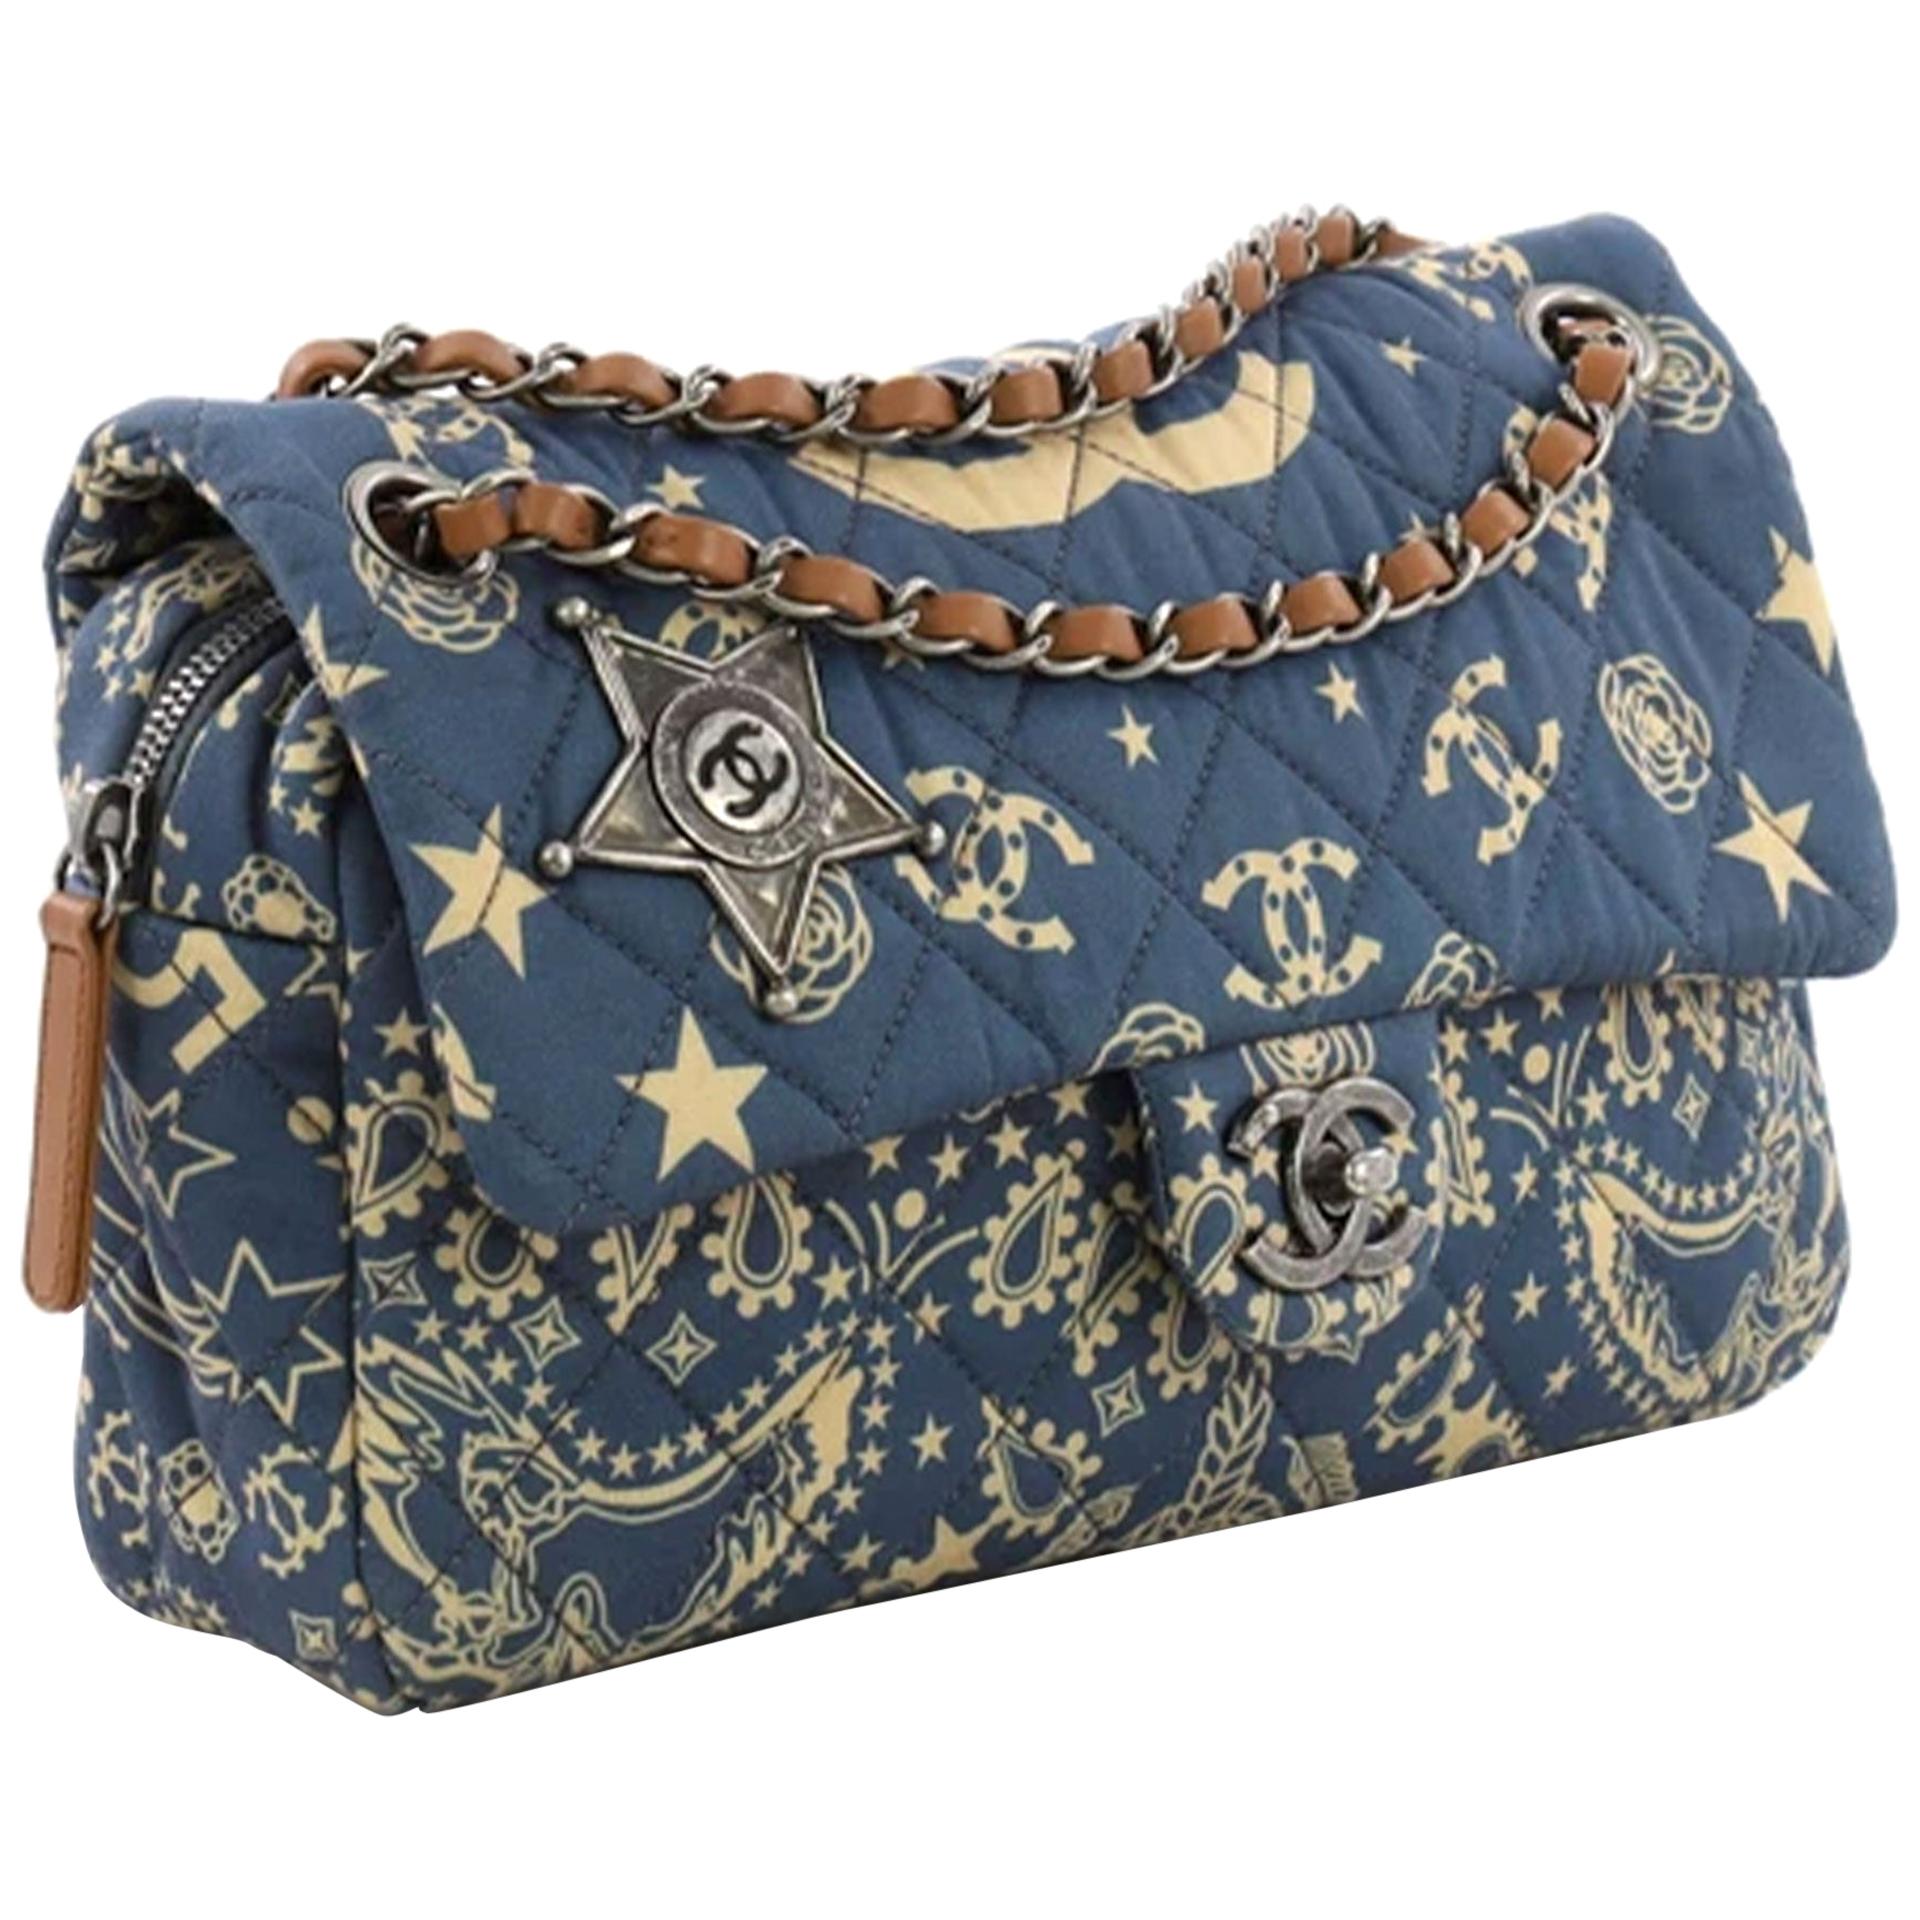 Chanel 2014 Blue Beige Canvas Quilted Bandana Medium Classic Flap Shoulder Bag In Good Condition For Sale In Miami, FL